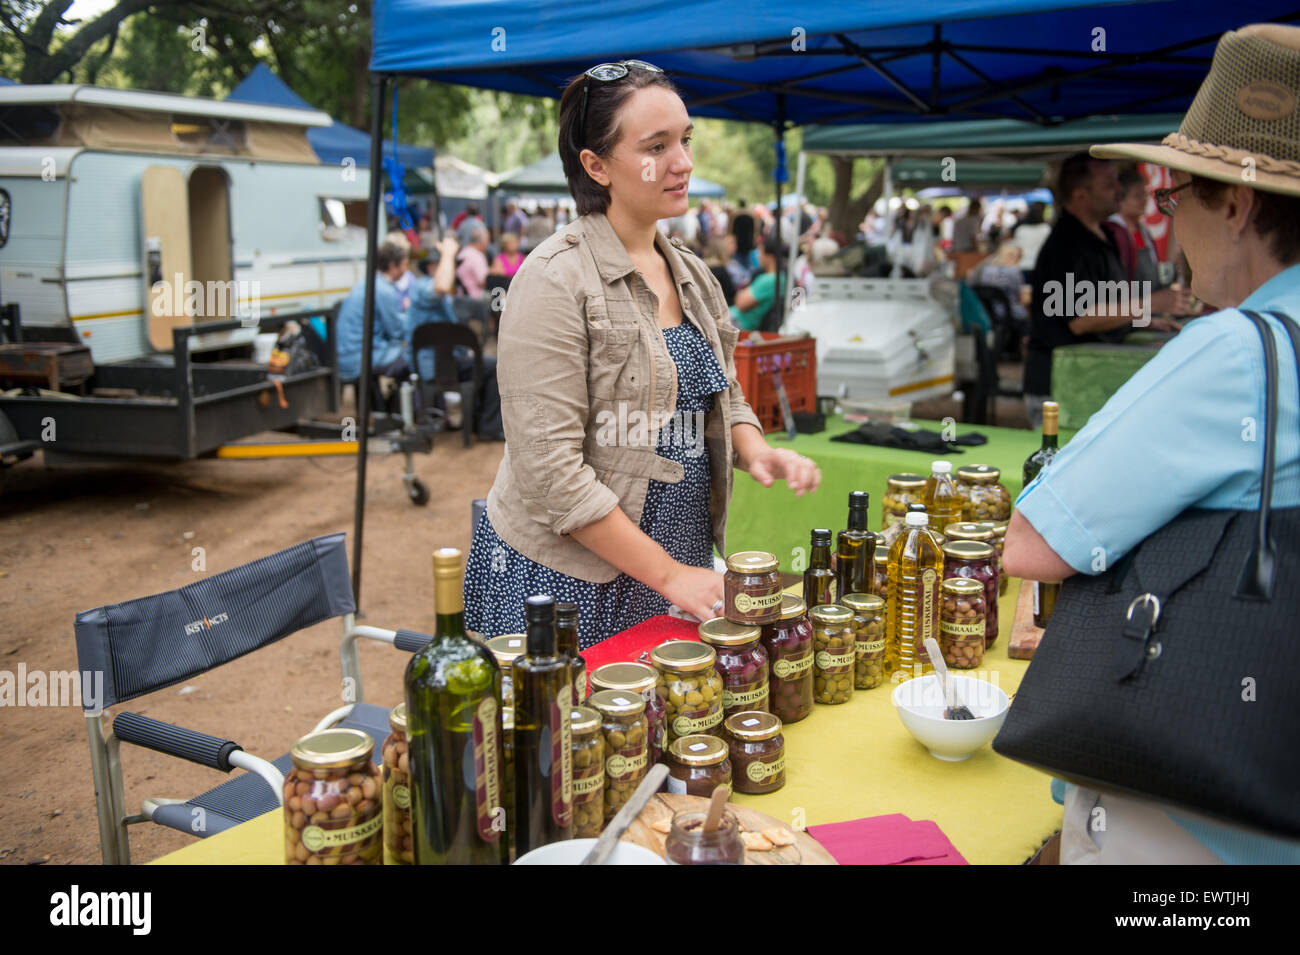 SOUTH AFRICA- Woman running a stand at farmers market in Pretoria Stock Photo